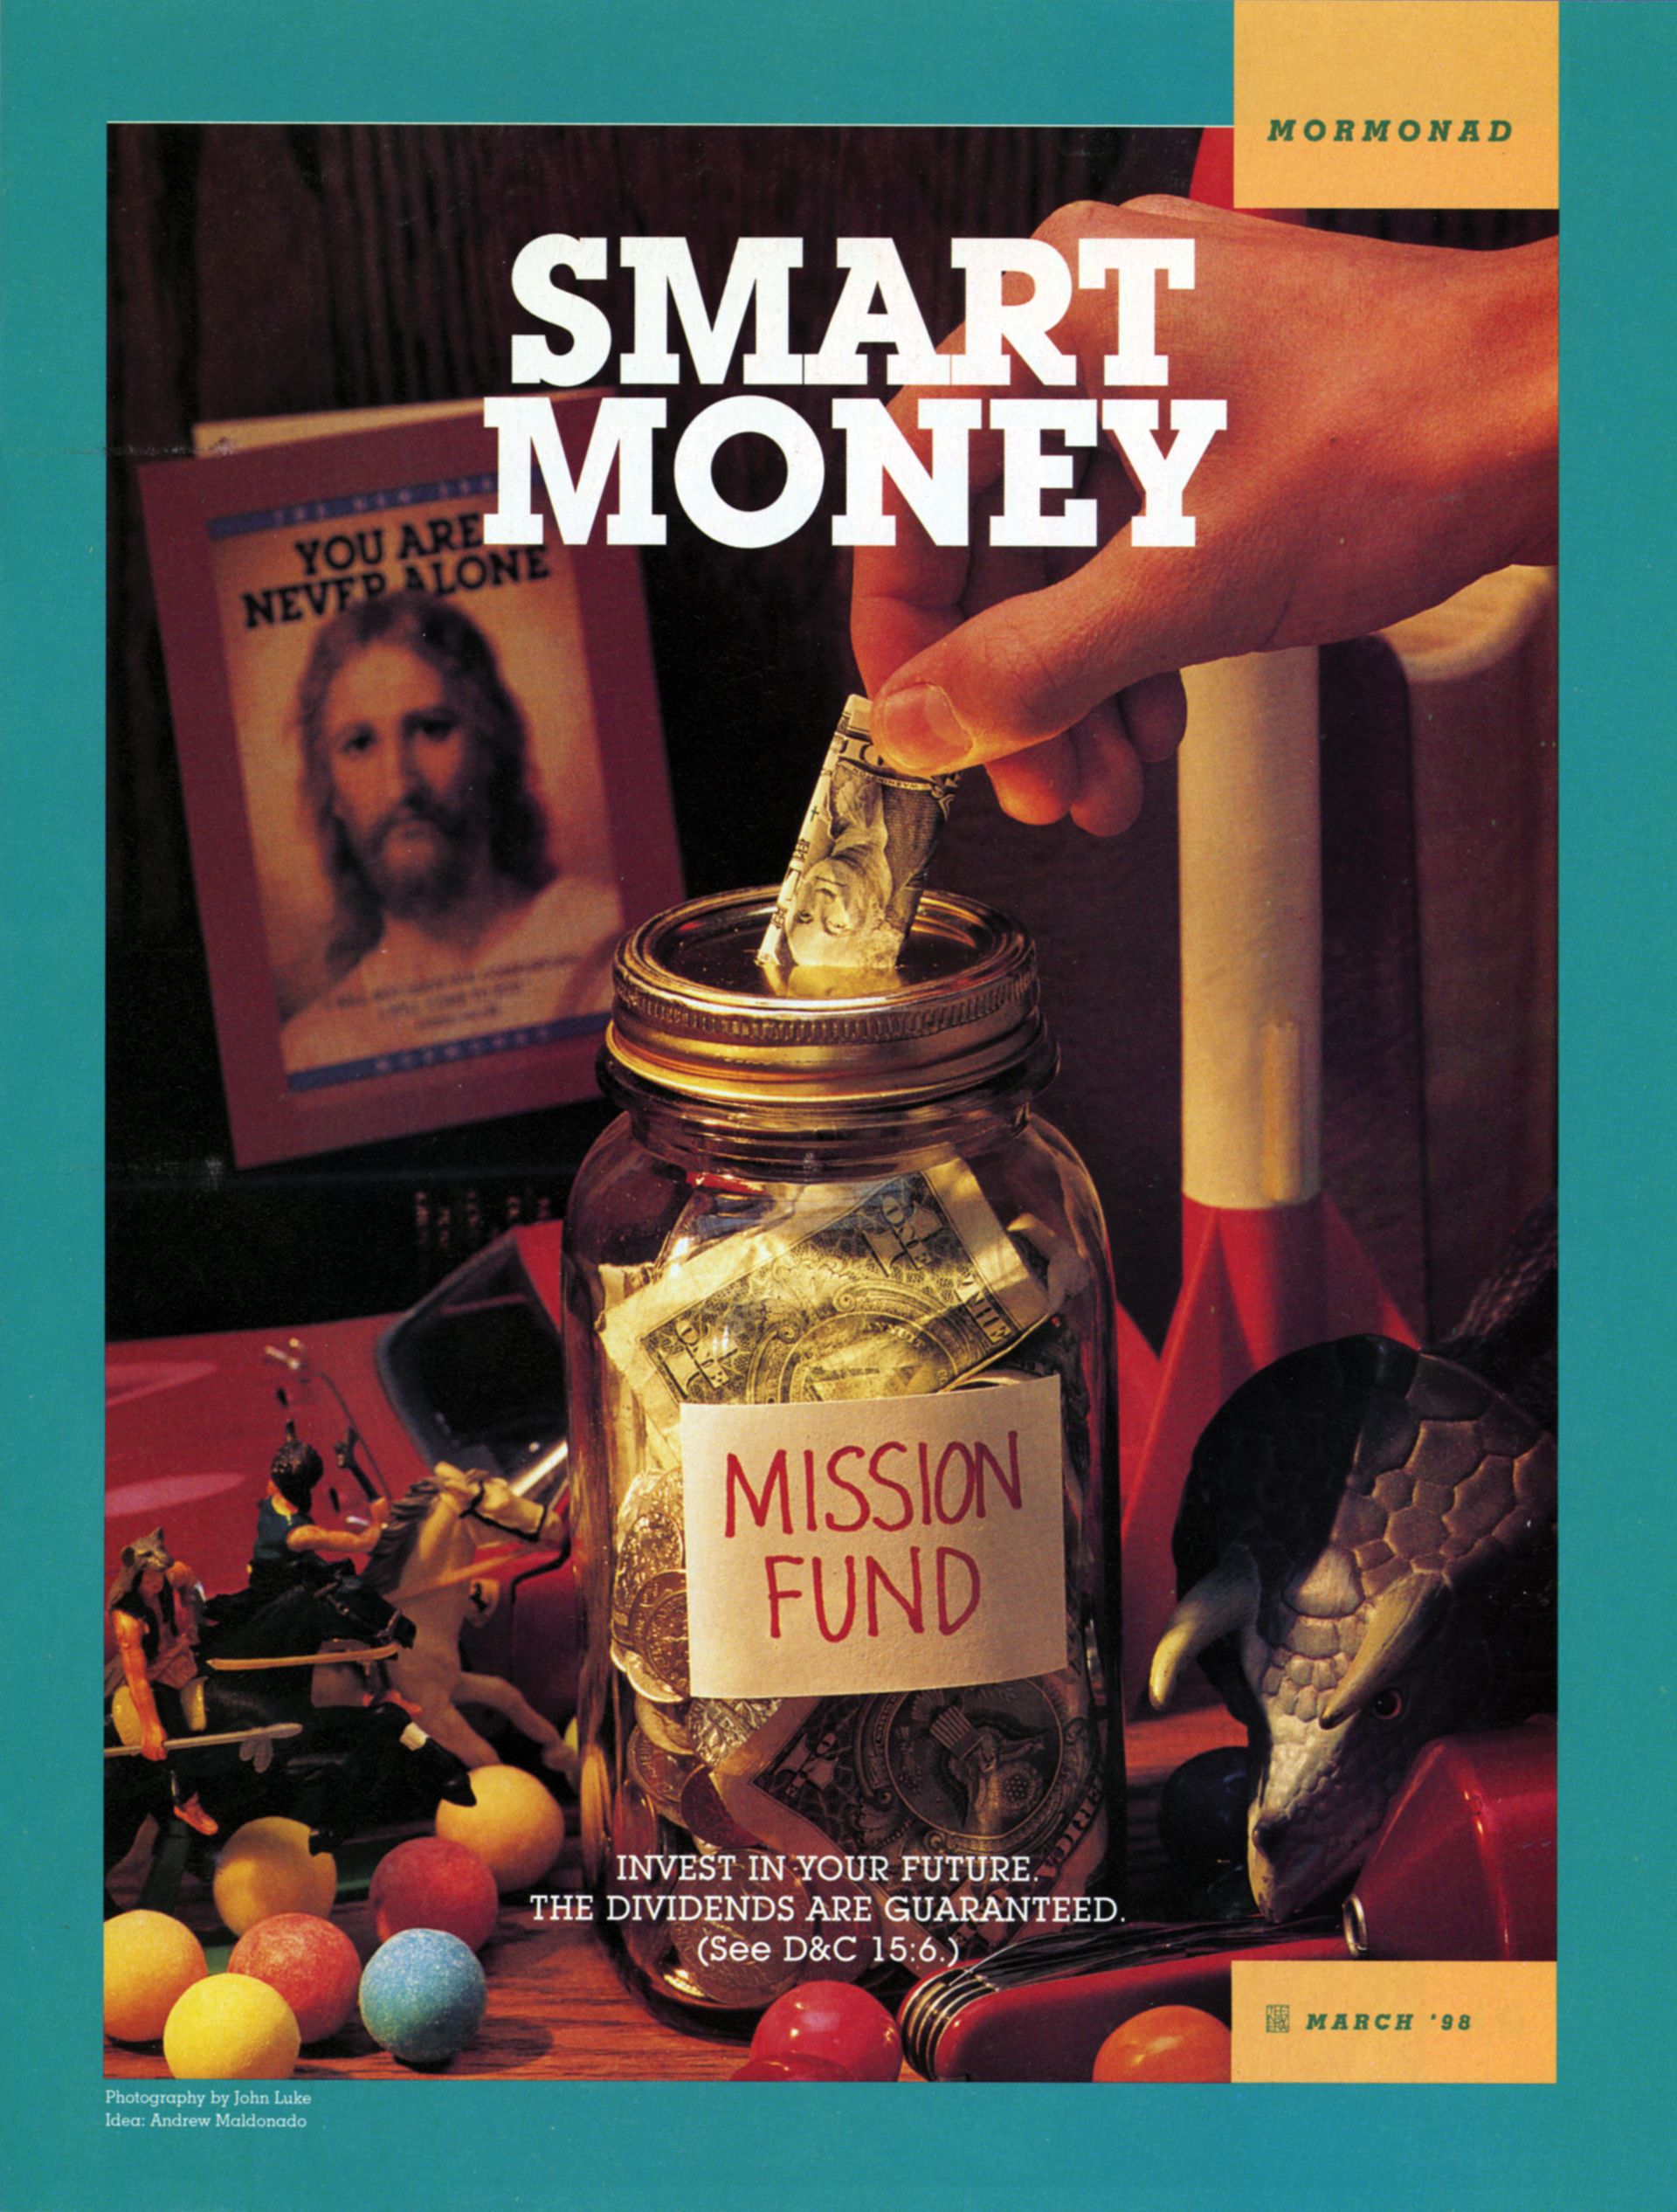 Smart Money. Invest in your future. The dividends are guaranteed. (See D&C 15:6.) Mar. 1998 © undefined ipCode 1.